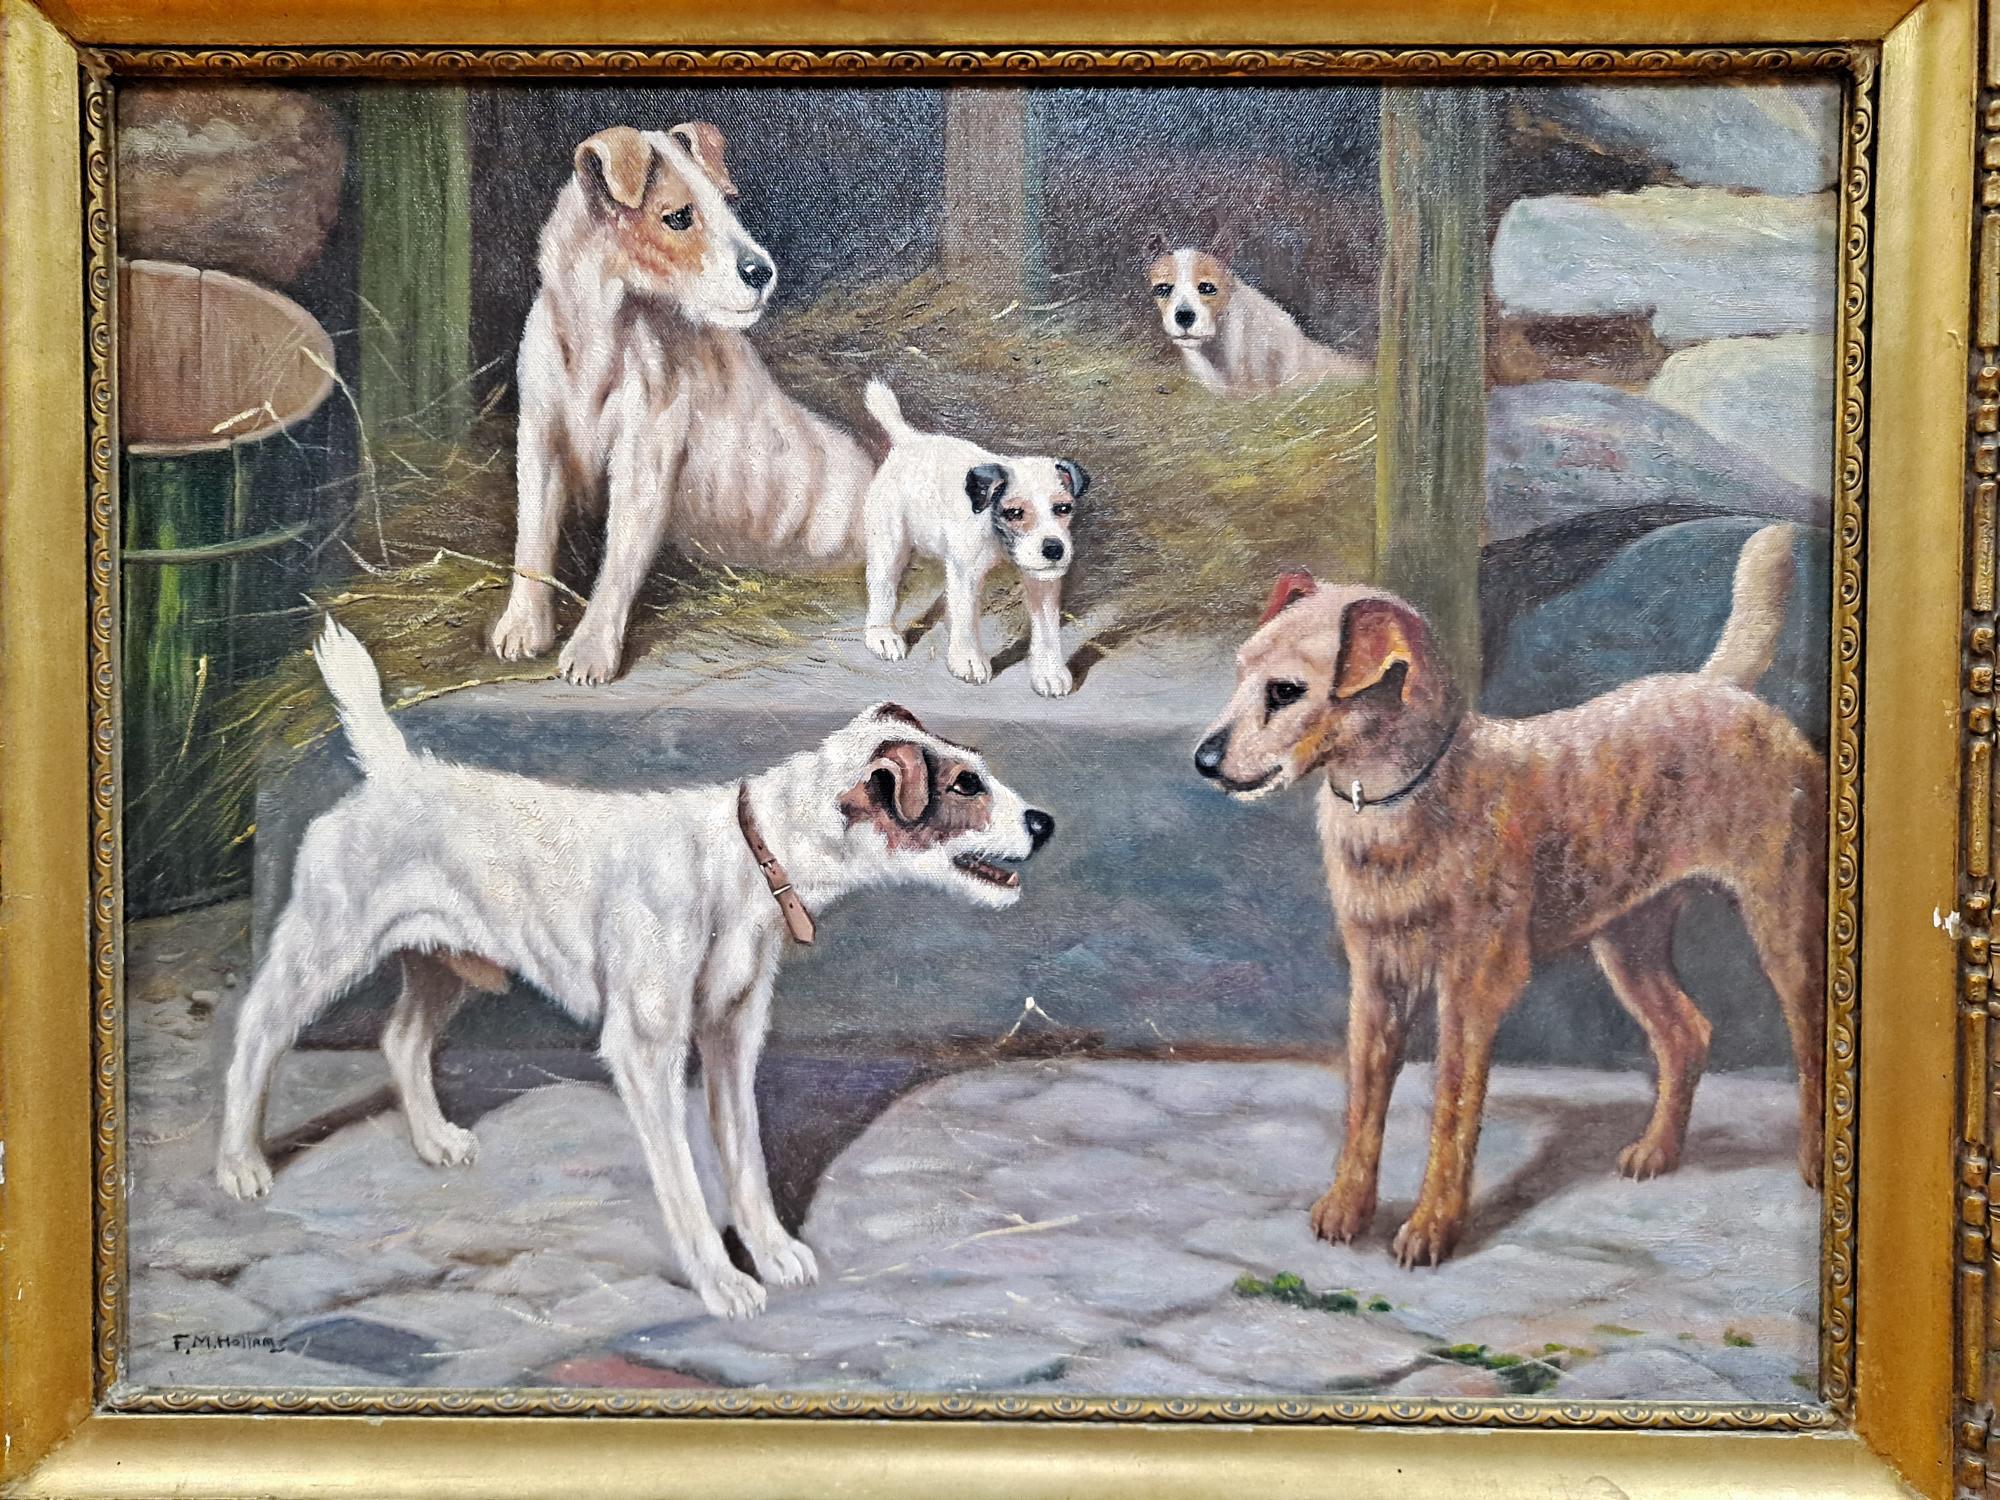 F. M. Hollams (1877-1963) Jack Russells in a Barn Oil on Canvas Board Painting

24